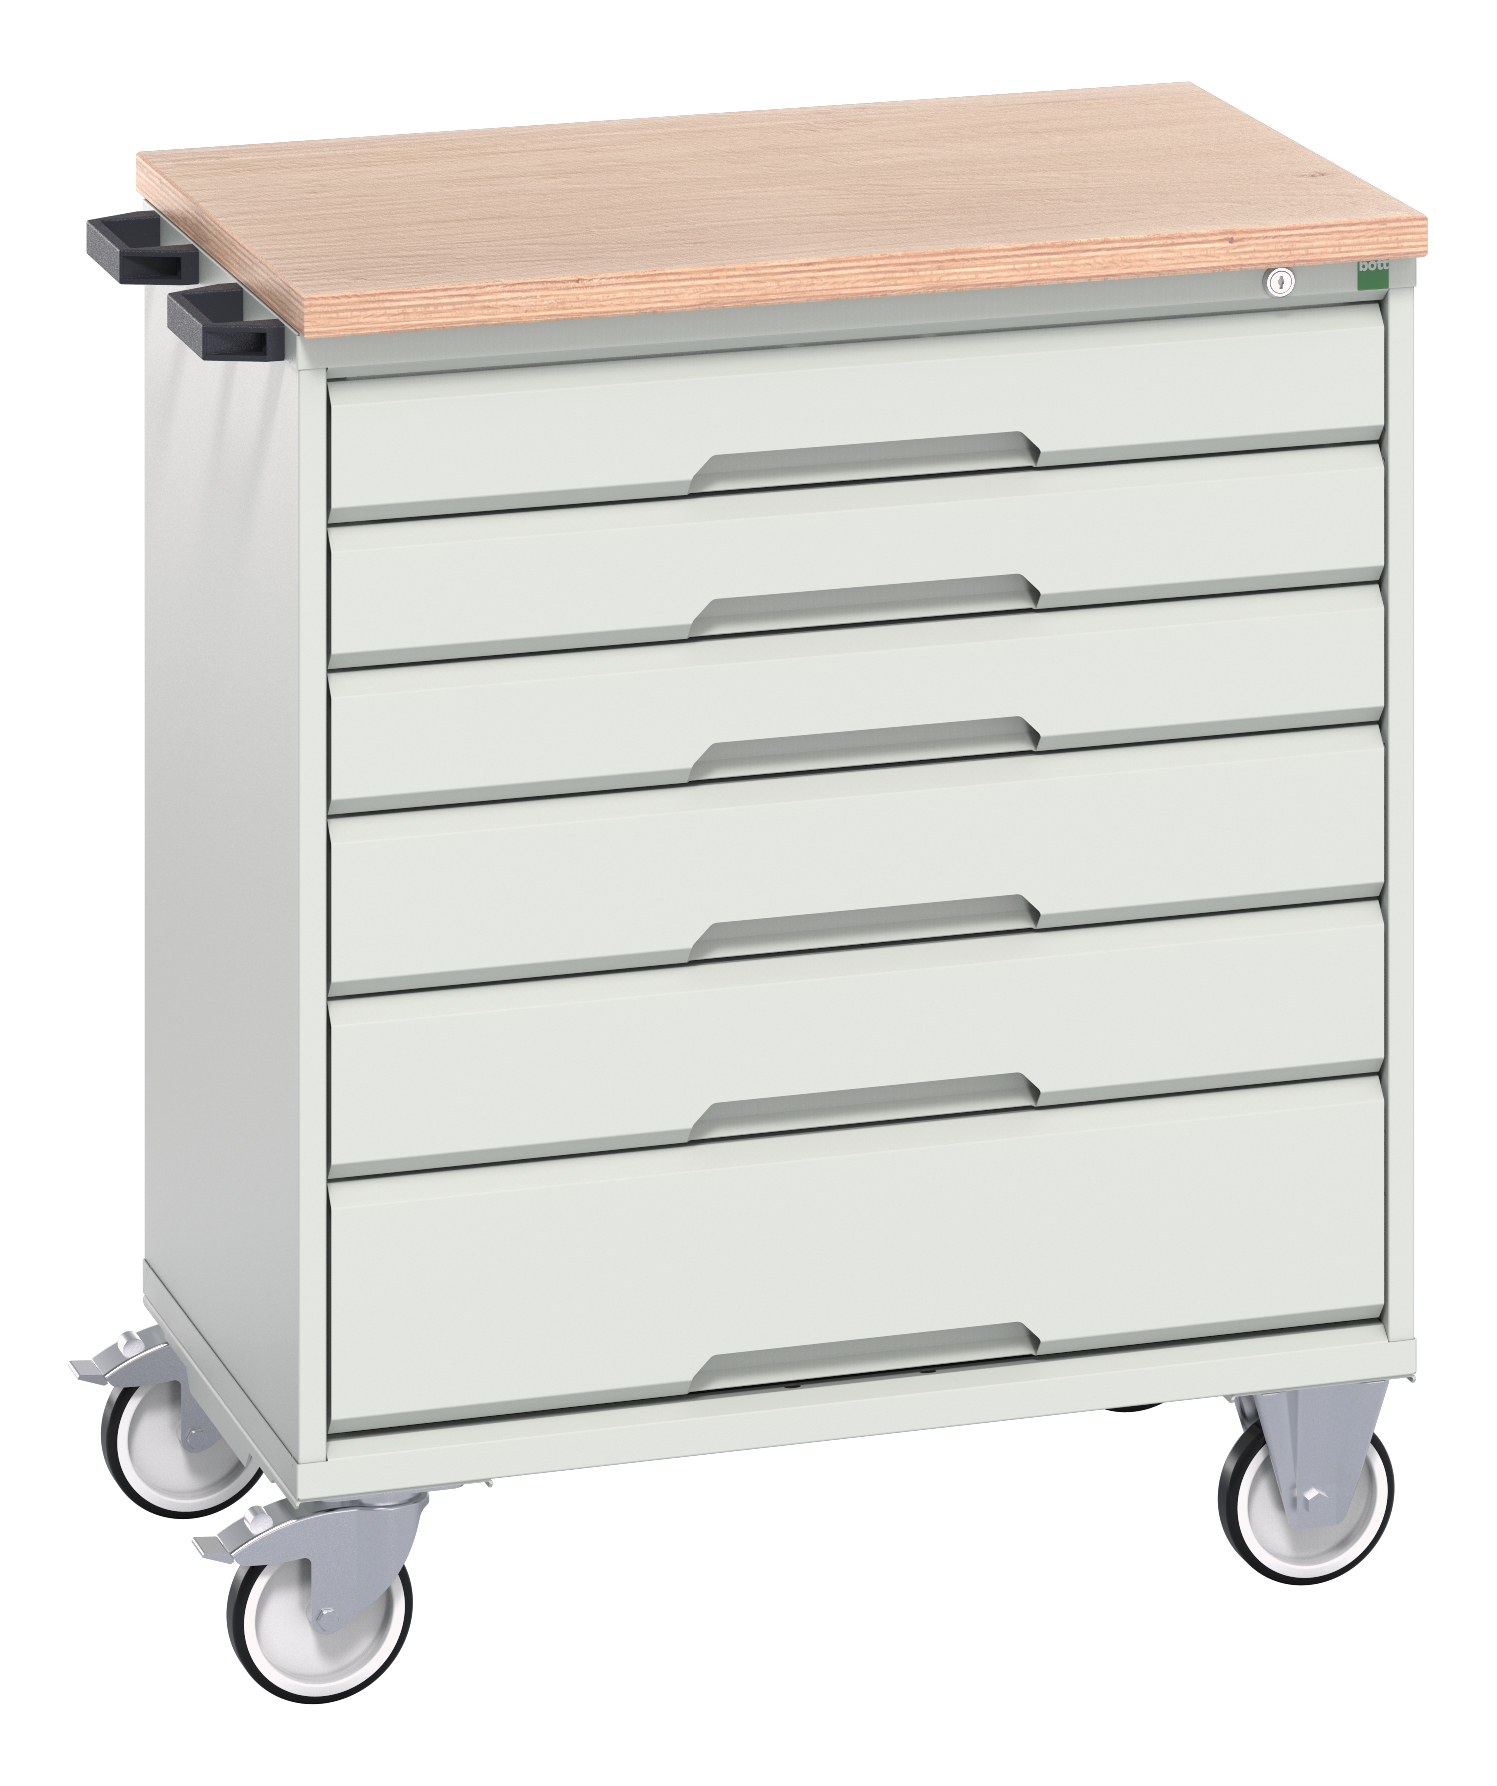 Bott Verso Mobile Drawer Cabinet With 6 Drawers & Multiplex Top - 16927004.16